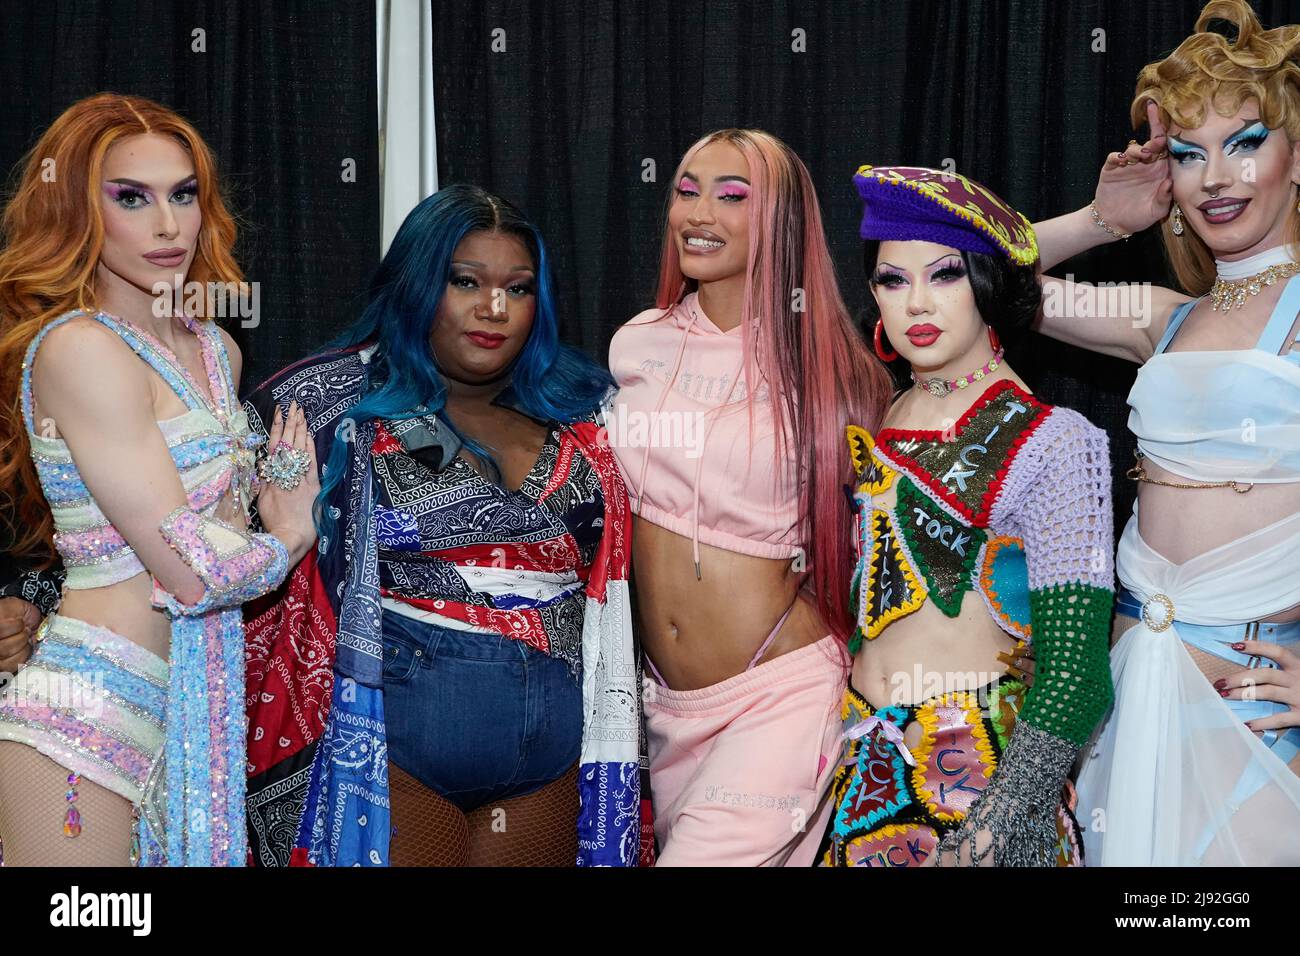 Jasmine Kennedie, Kornbread the snack Jeté, Kerri Colby, Willow Pill, Bosco during the 2022 RuPaul DragCon, Day 2, held at the LA Convention Center in Los Angeles, California, Friday, May 14, 2022.  Photo by Jennifer Graylock-Graylock.com Stock Photo